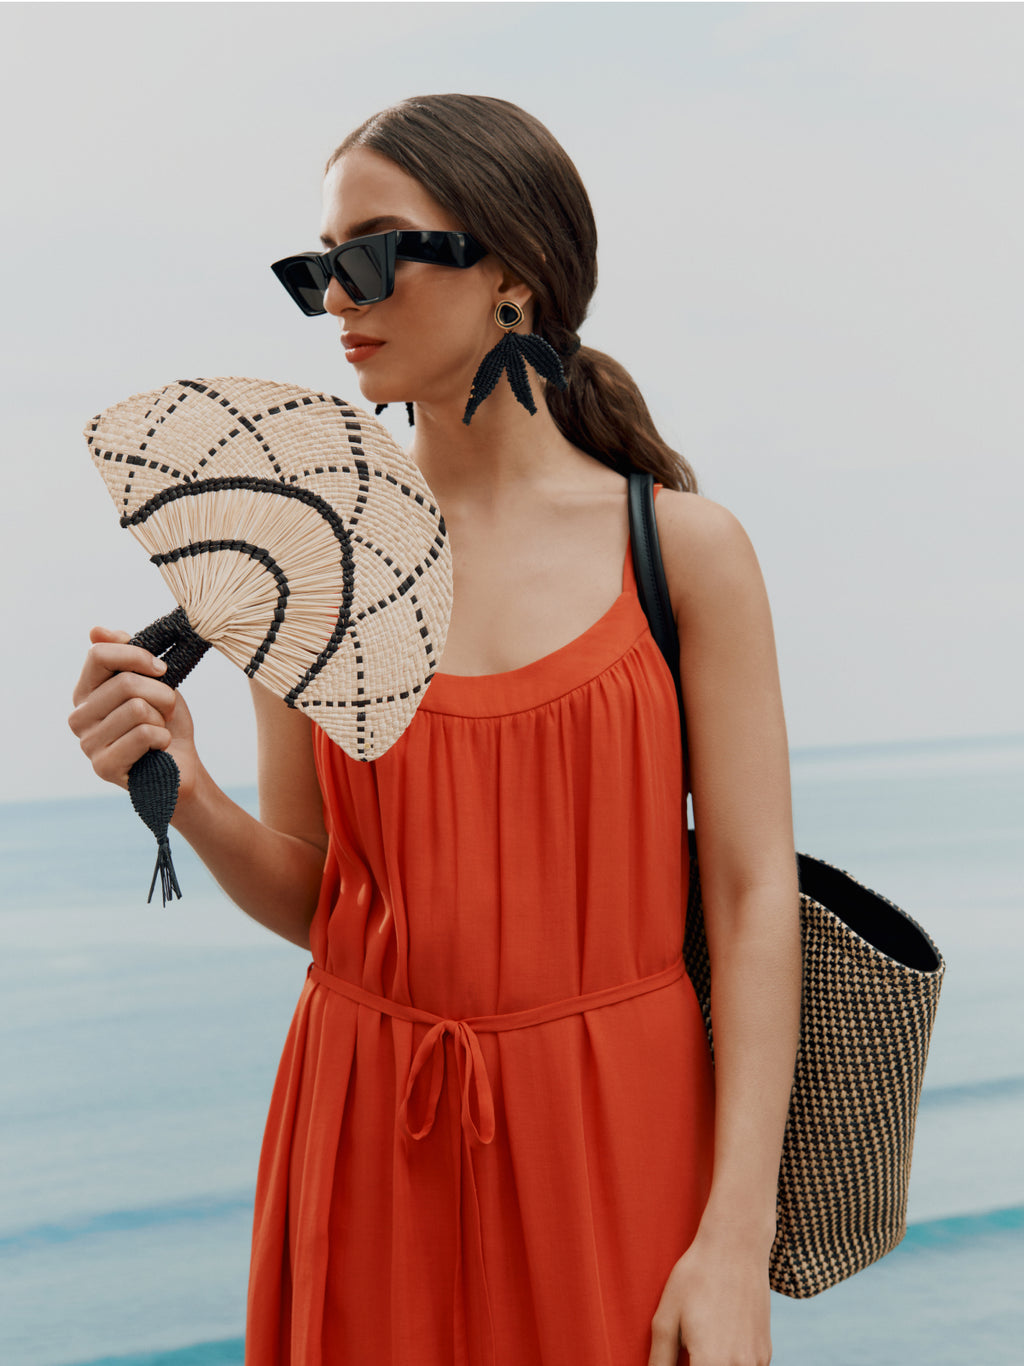 Woman in dress with fan, large earrings, sunglasses, and beach bag standing by the sea.